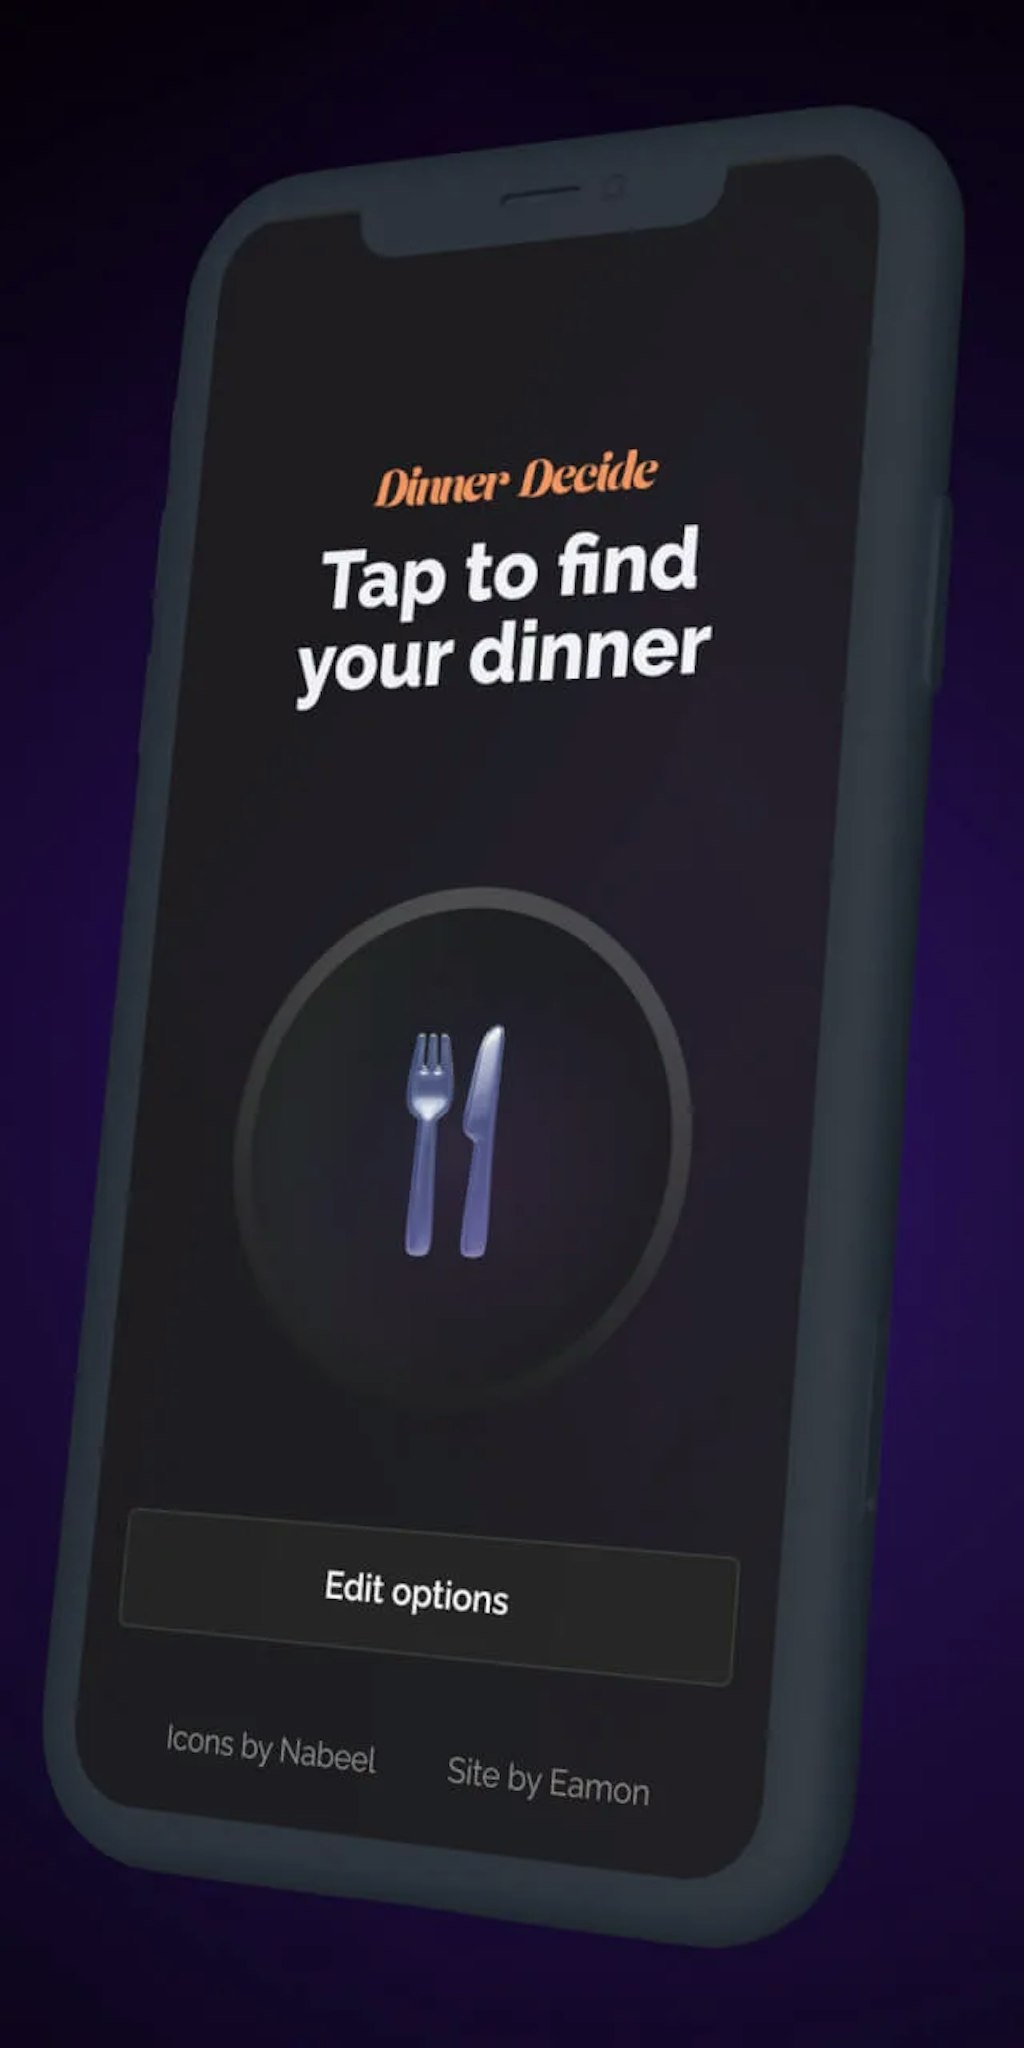 A mockup of a phone with the Dinner Decide website on it.